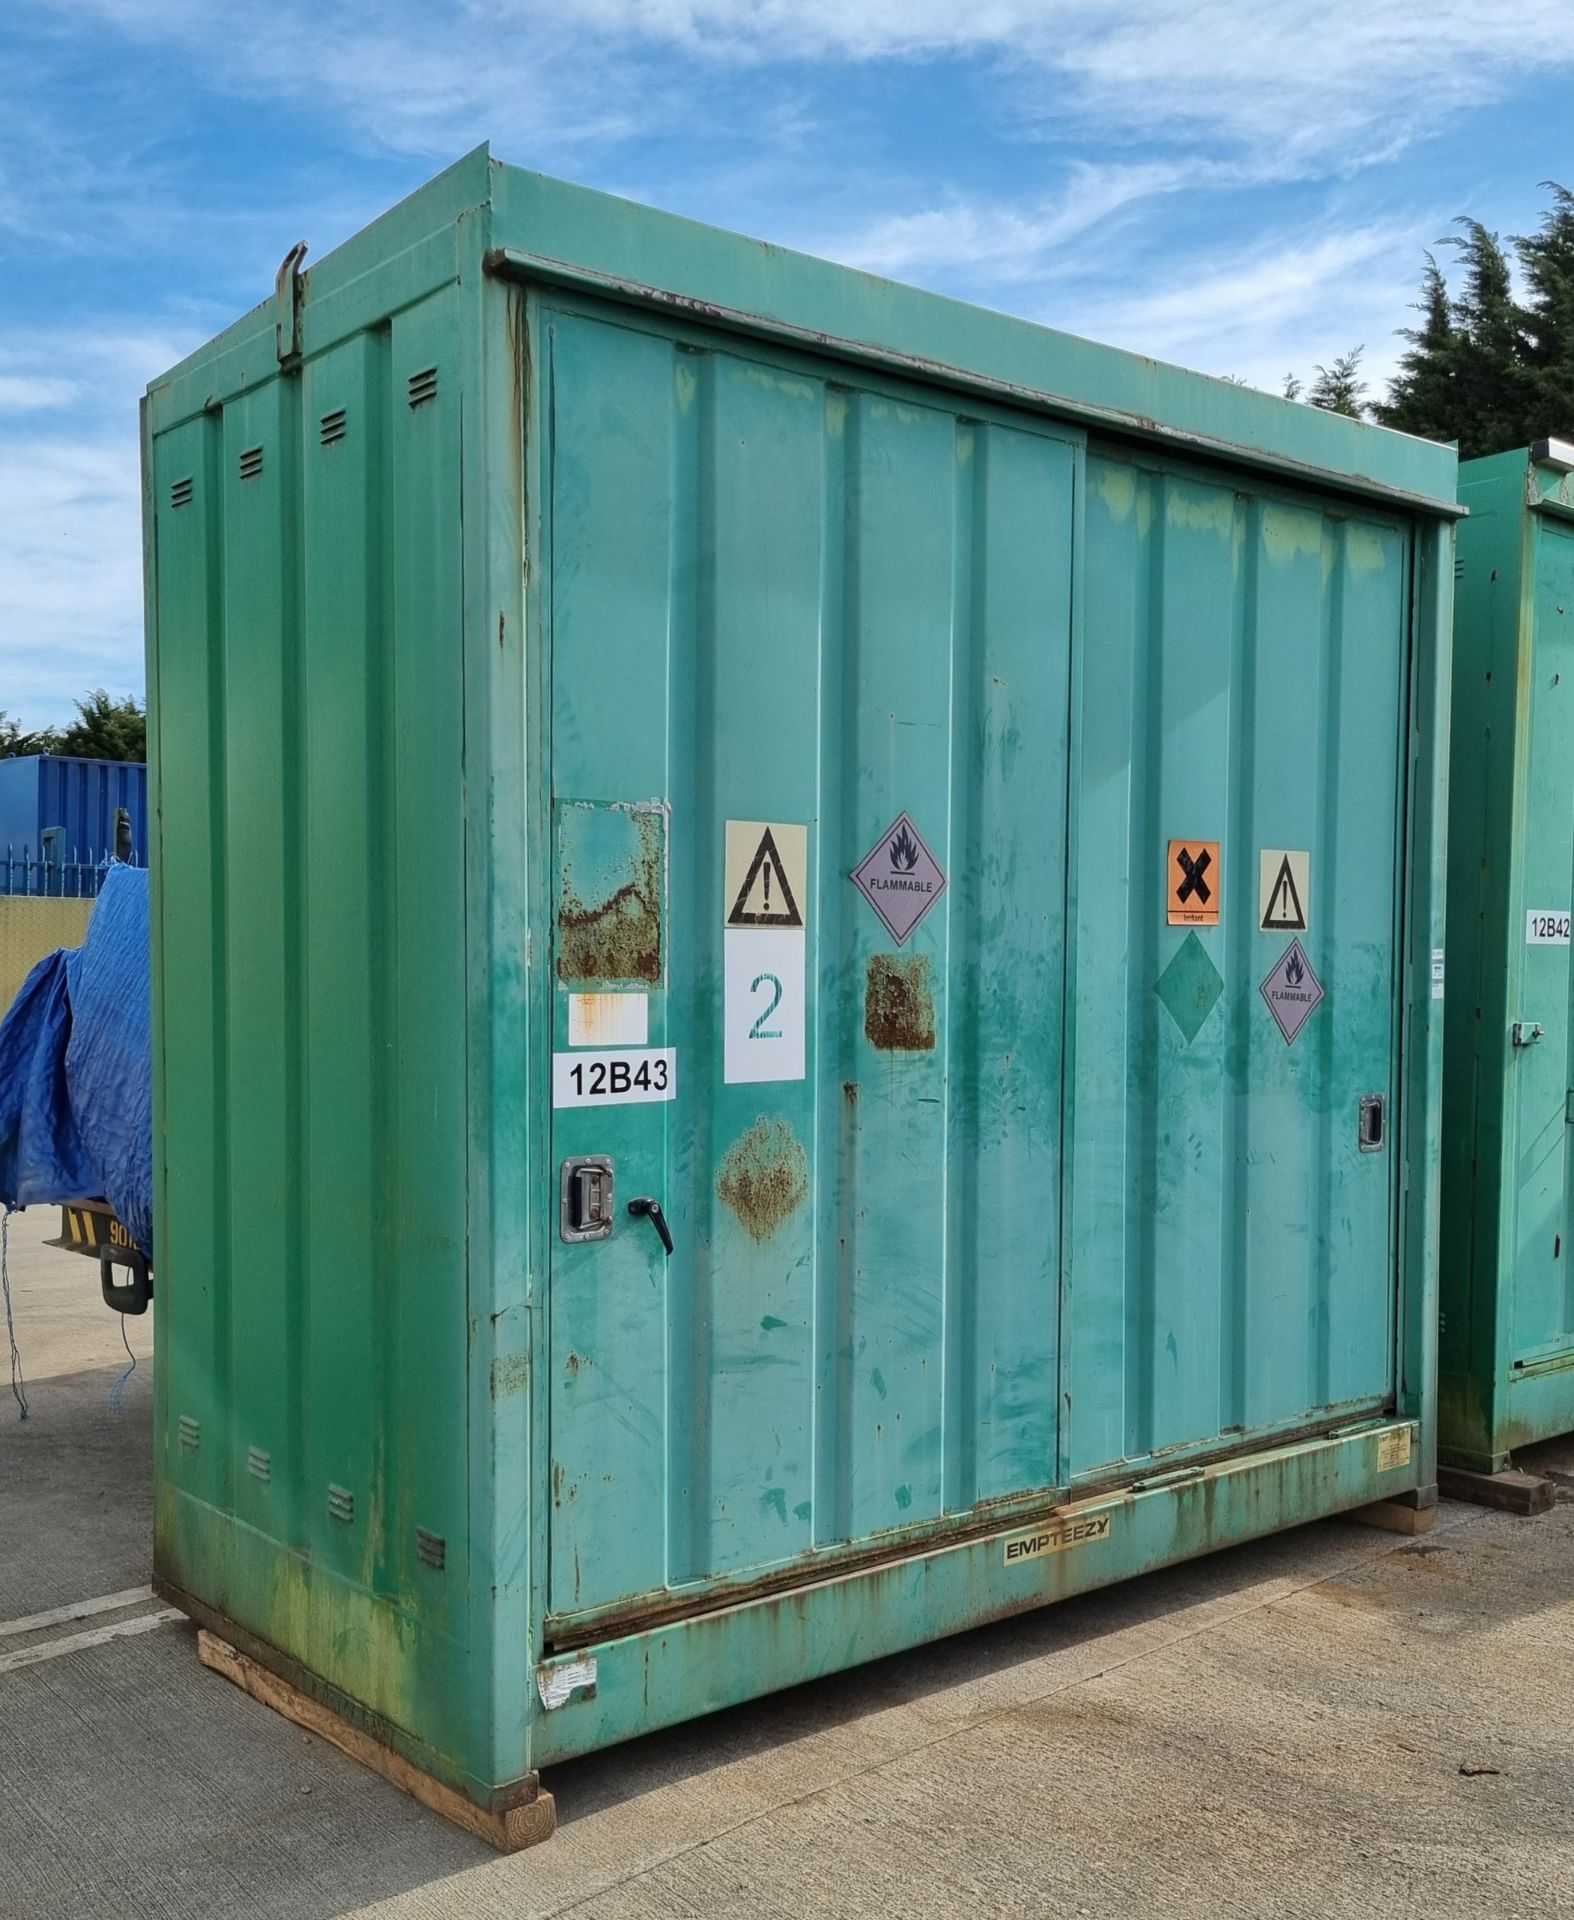 Empteezy ICB storage container - green - W 3050 x D 1500 x H 3000mm - Image 2 of 9